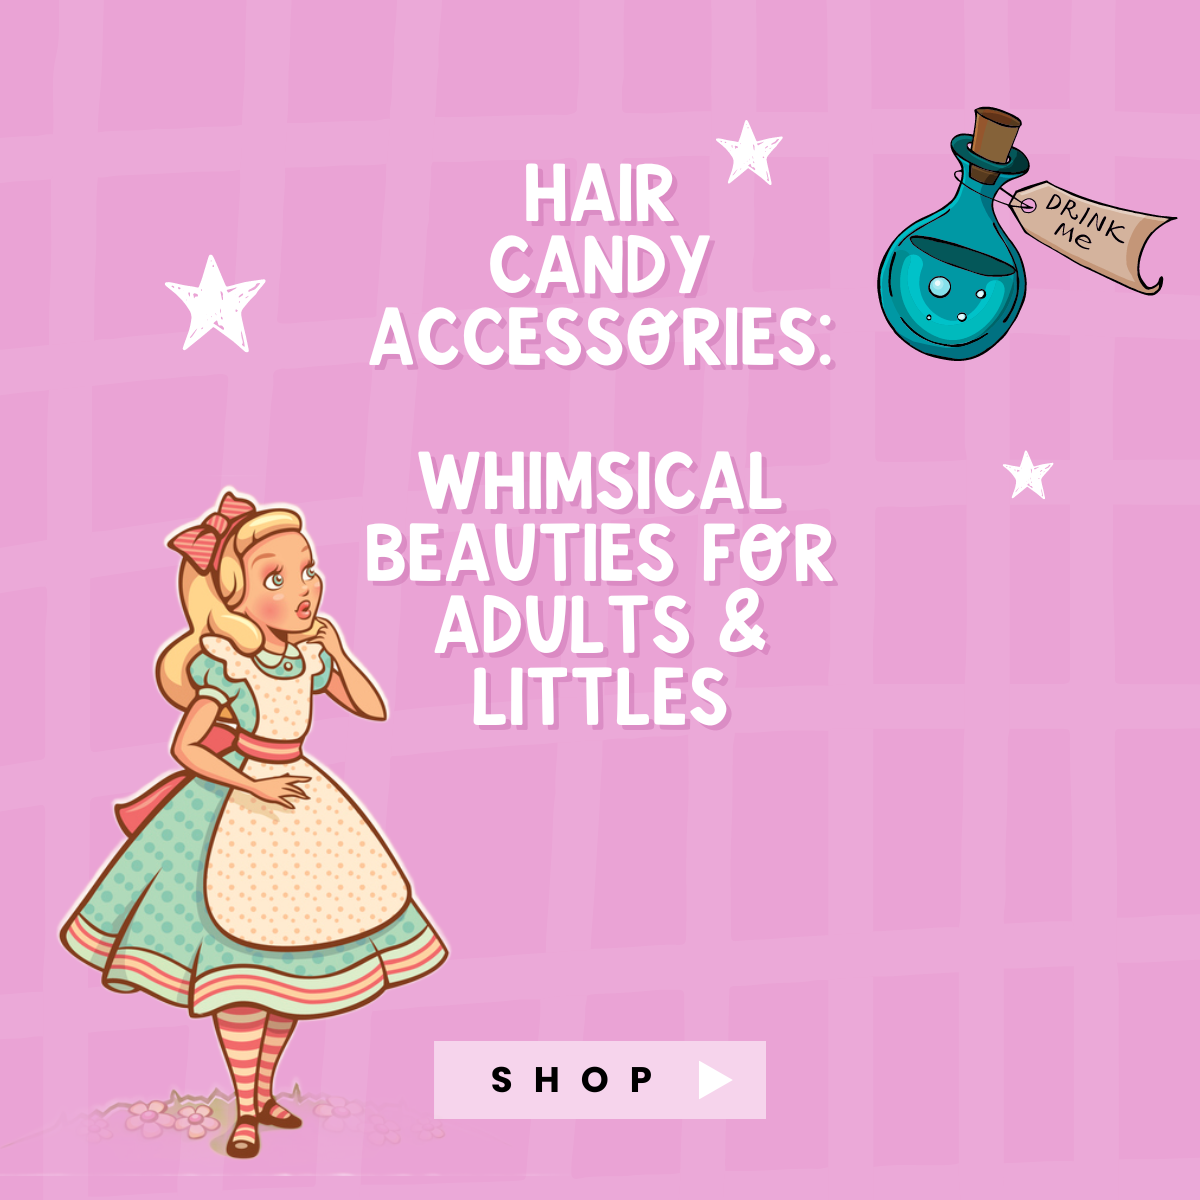 Hair Candy Accessories: Whimsical Beauties for Adults & Littles